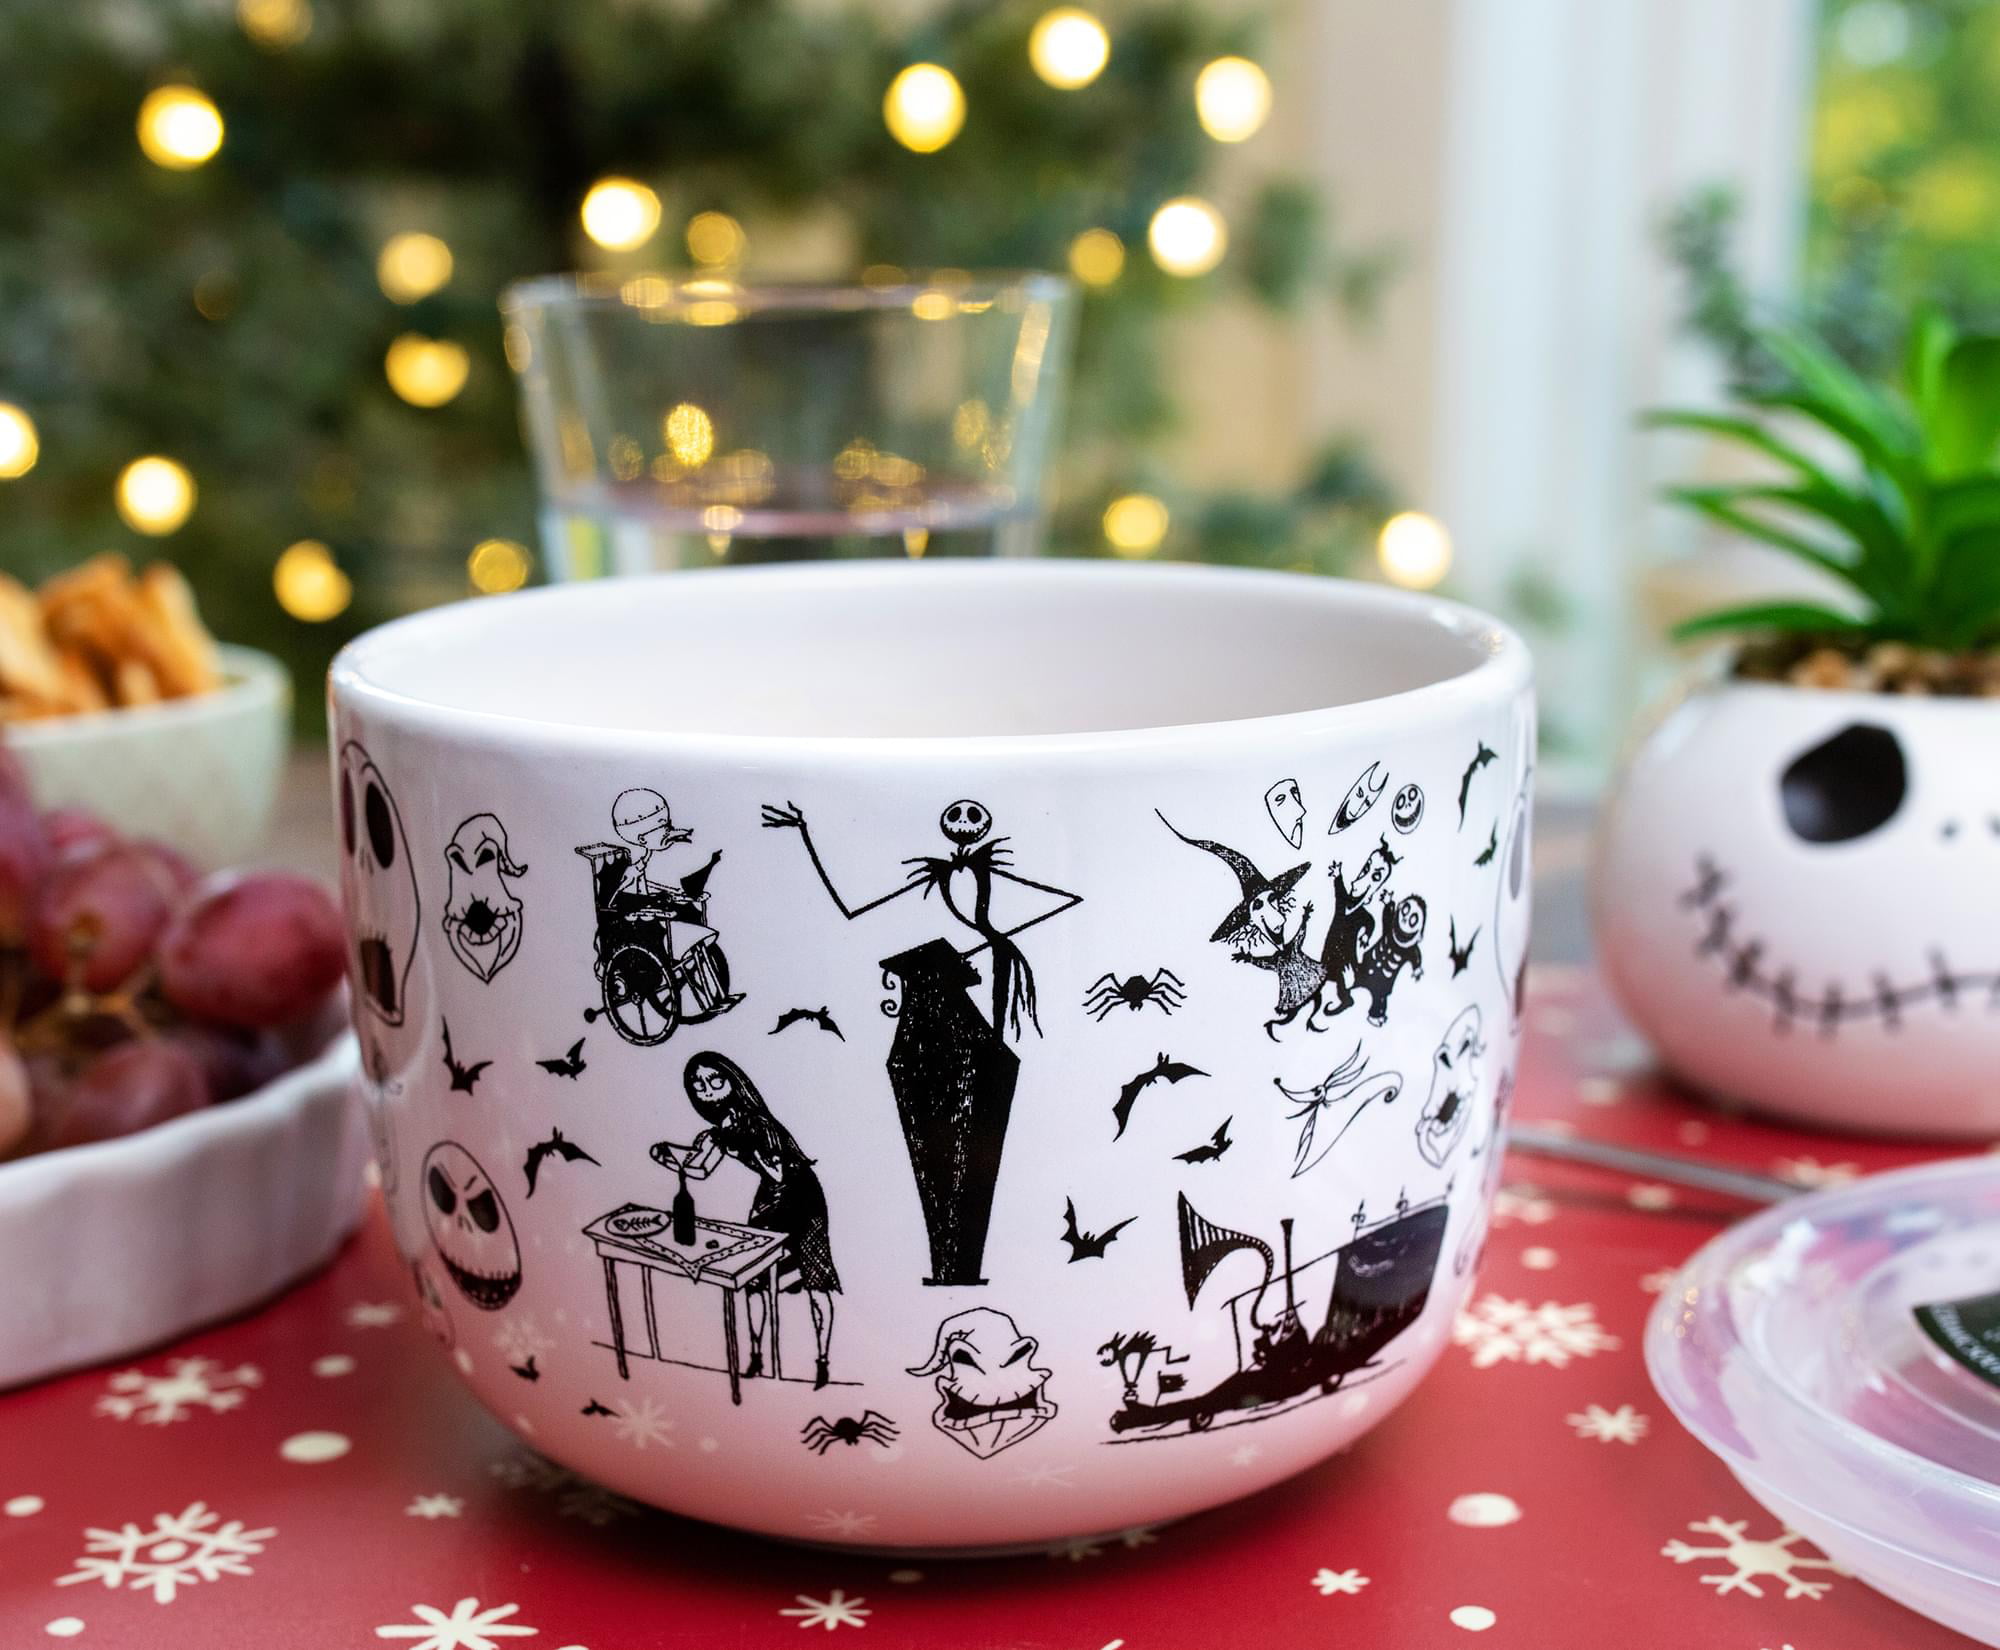  Disney The Nightmare Before Christmas Jack Expressions Ceramic  Soup Mug With Vented Lid, Bowl Container For Ice Cream, Cereal, Large  Coffee Mugs and Cups, Home & Kitchen Essentials